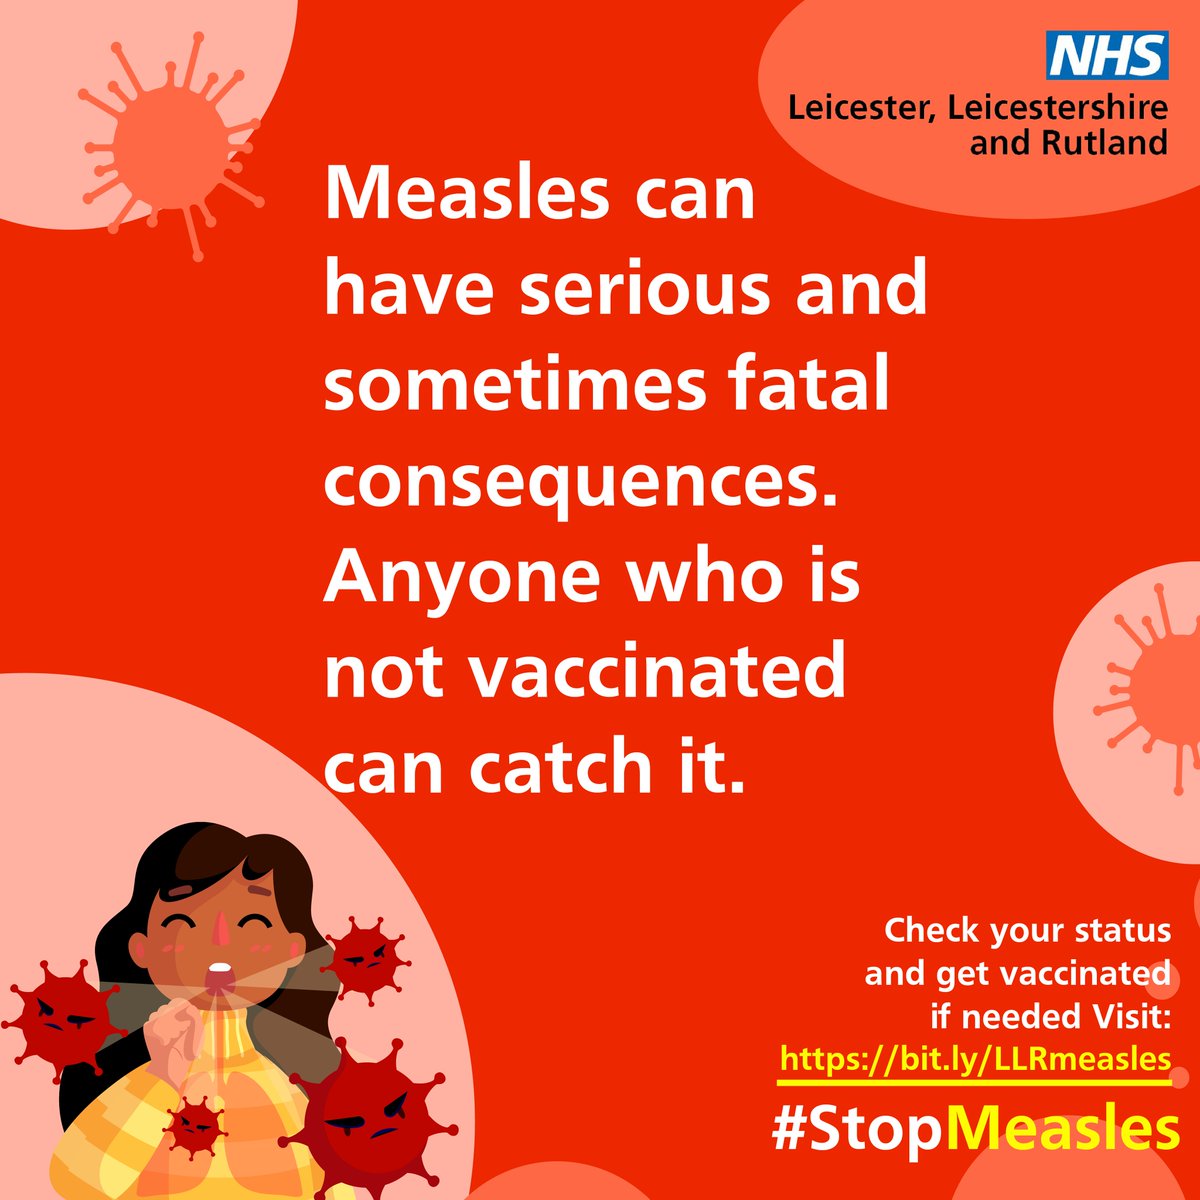 Measles spreads easily. Anyone who is not vaccinated can catch it. Measles can have serious and sometimes fatal consequences, so make sure you’re up to date with #MMR vaccinations and ask your GP practice about catch up jabs if needed. Visit: bit.ly/LLRmeasles